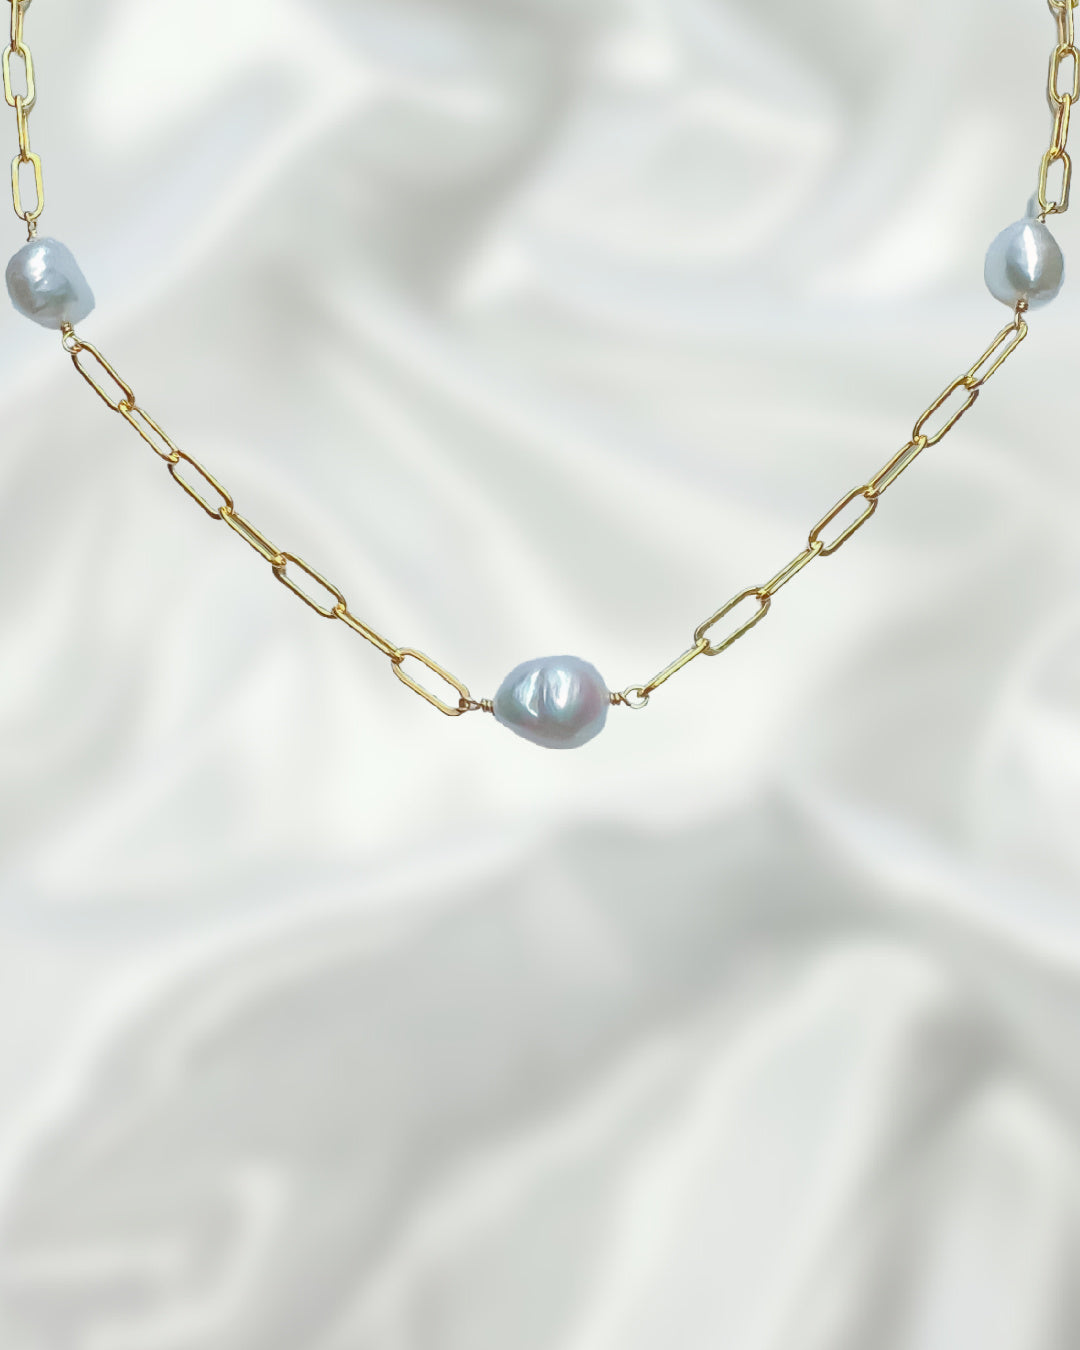 14k Gold Filled Paperclip Necklace with Pearl – Kamo by Kary Brittingham